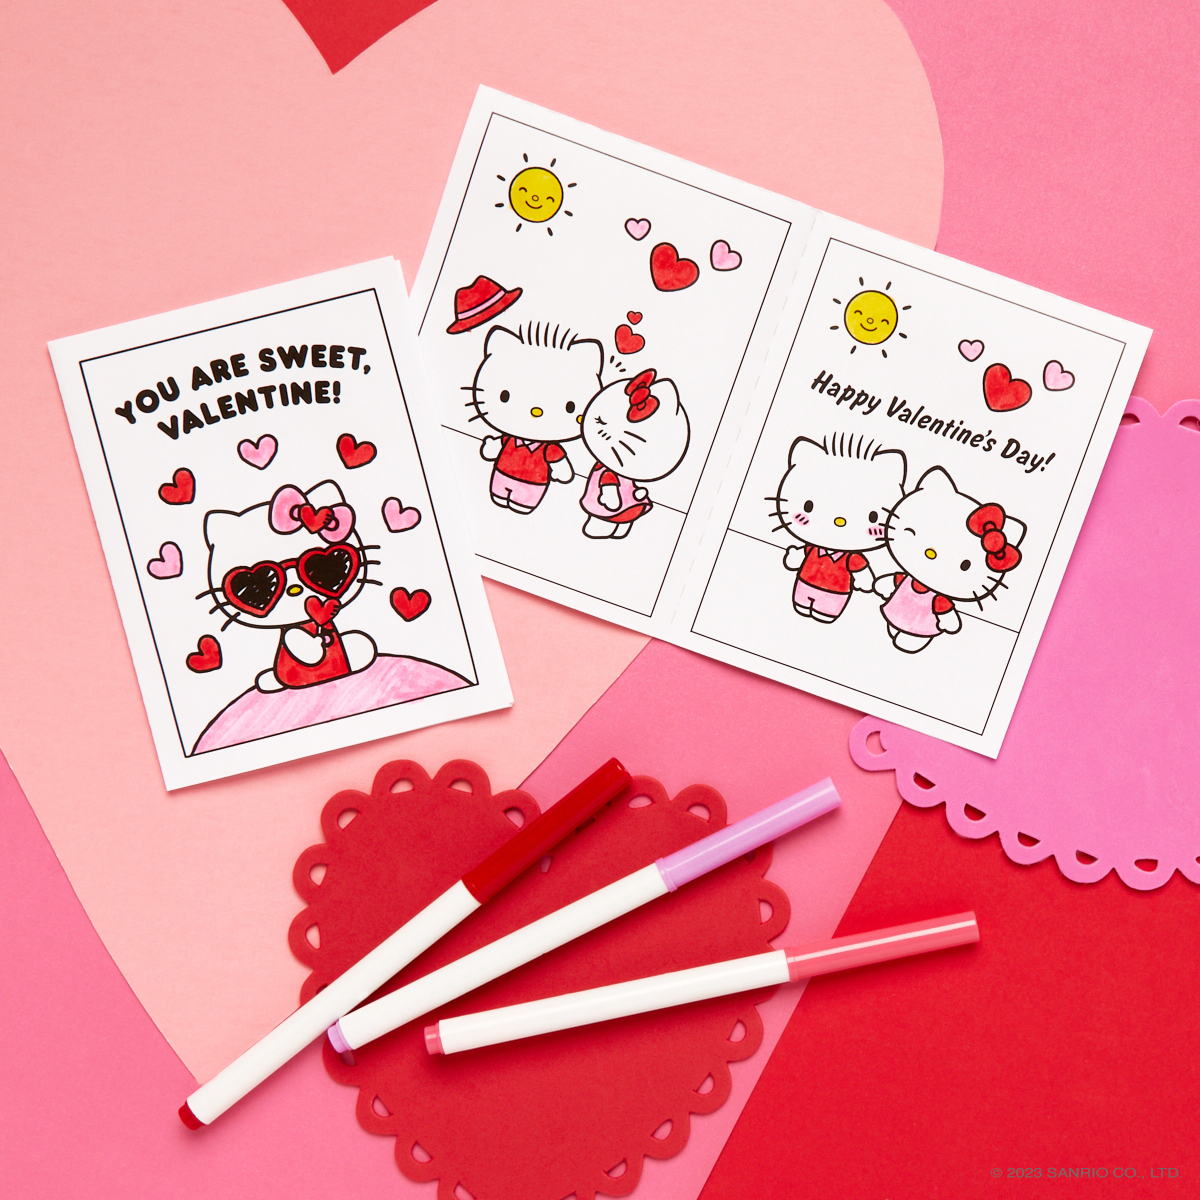 Hello Kitty on X: Super sweet Valentine 💕 Spread the love and